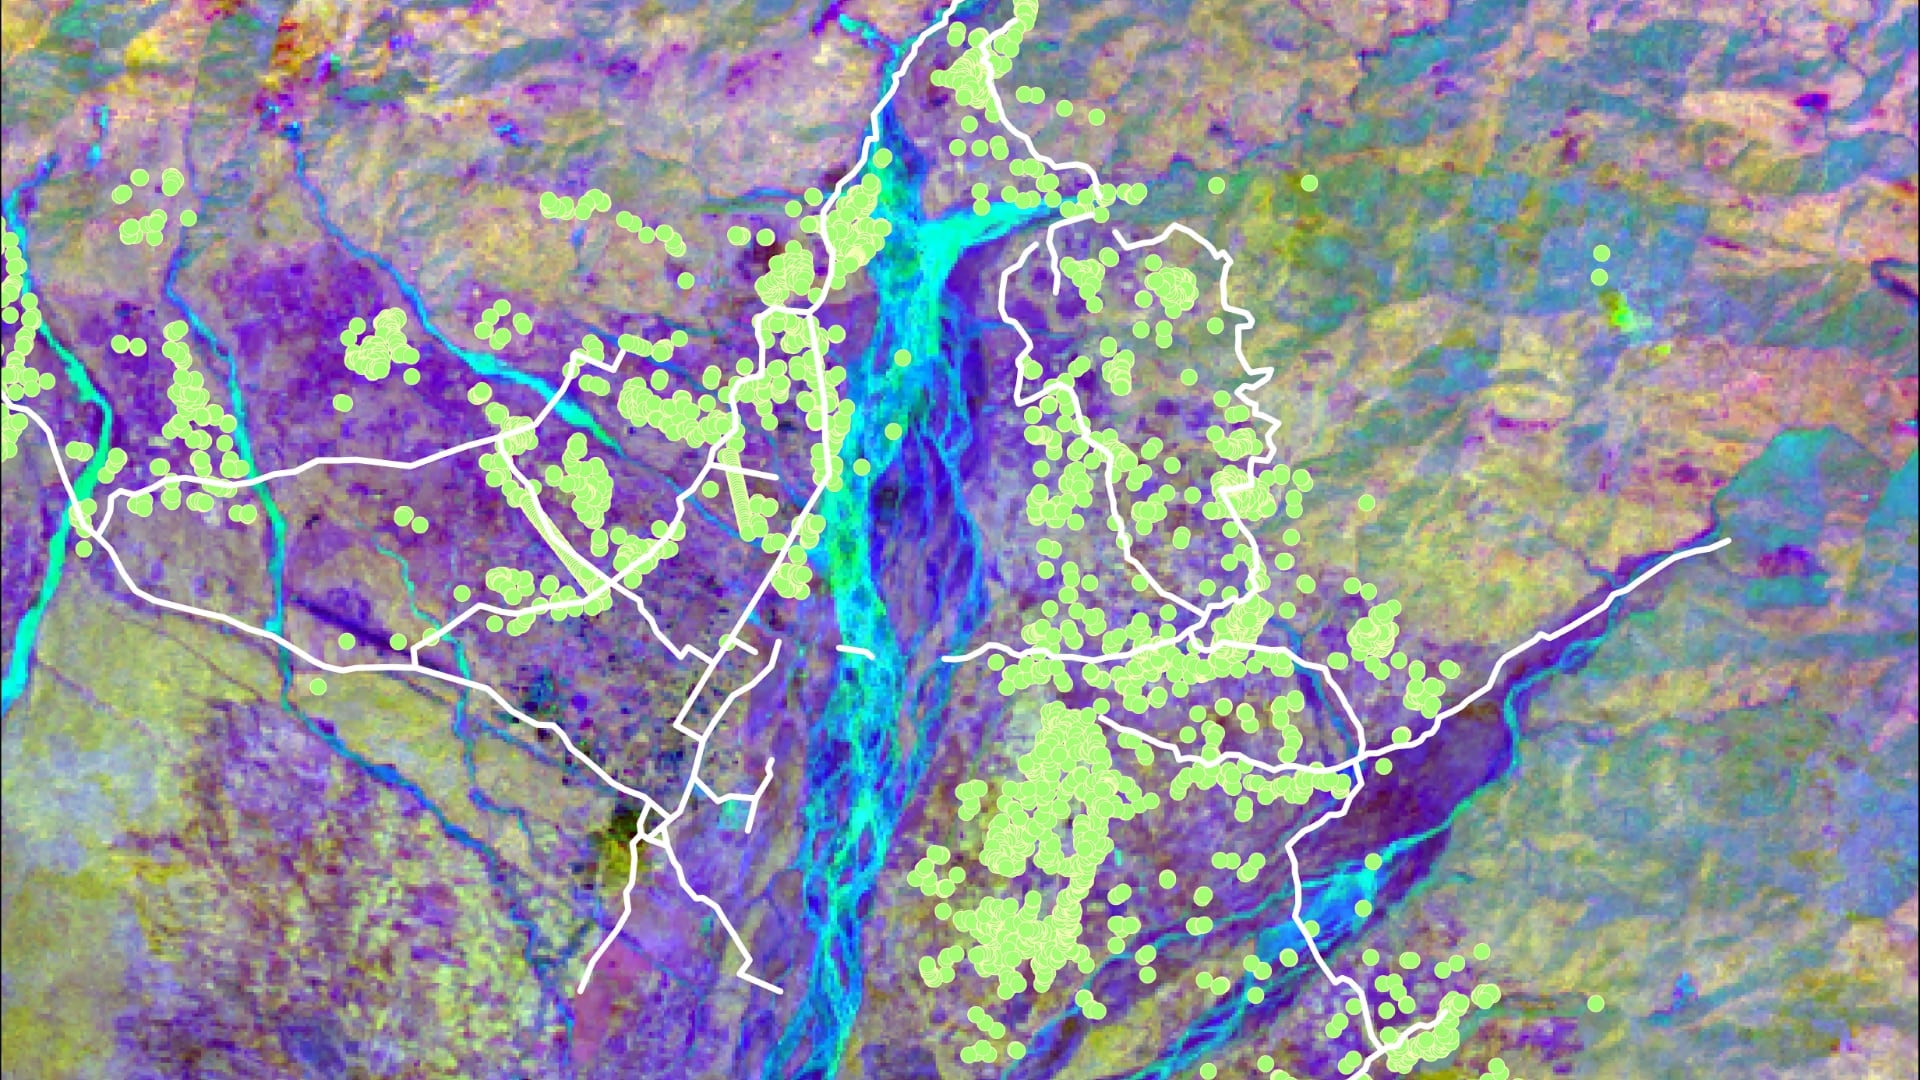 2020 Landsat 8 OLI data processed using principal component analysis with a band combination of 2, 3, and 9. Human settlements and roads are indicated by the green dots and white lines, respectively. The area displayed is the town of Gelephu along the southern border of Bhutan. Different colors represent different land cover types. This will provide information on land change trends which will assist partners in urban planning and allocation of wildlife corridors.Keywords: remote sensing, Asian elephant habitat, Bhutan, LULC change mapping, LULC change forecasting, wildlife corridor mapping